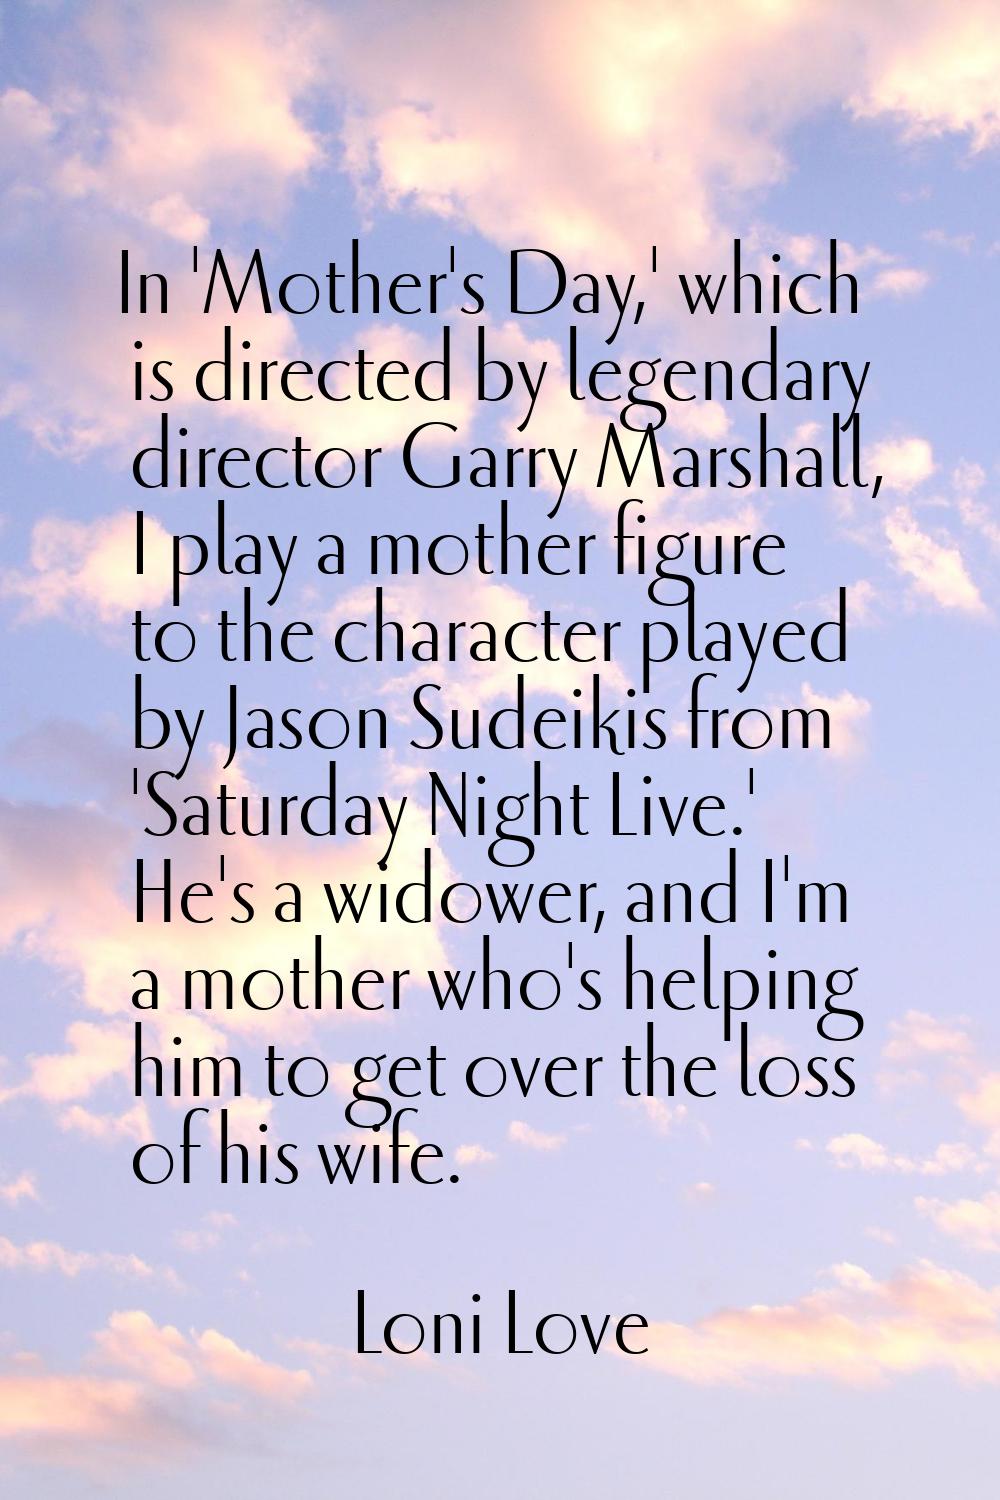 In 'Mother's Day,' which is directed by legendary director Garry Marshall, I play a mother figure t